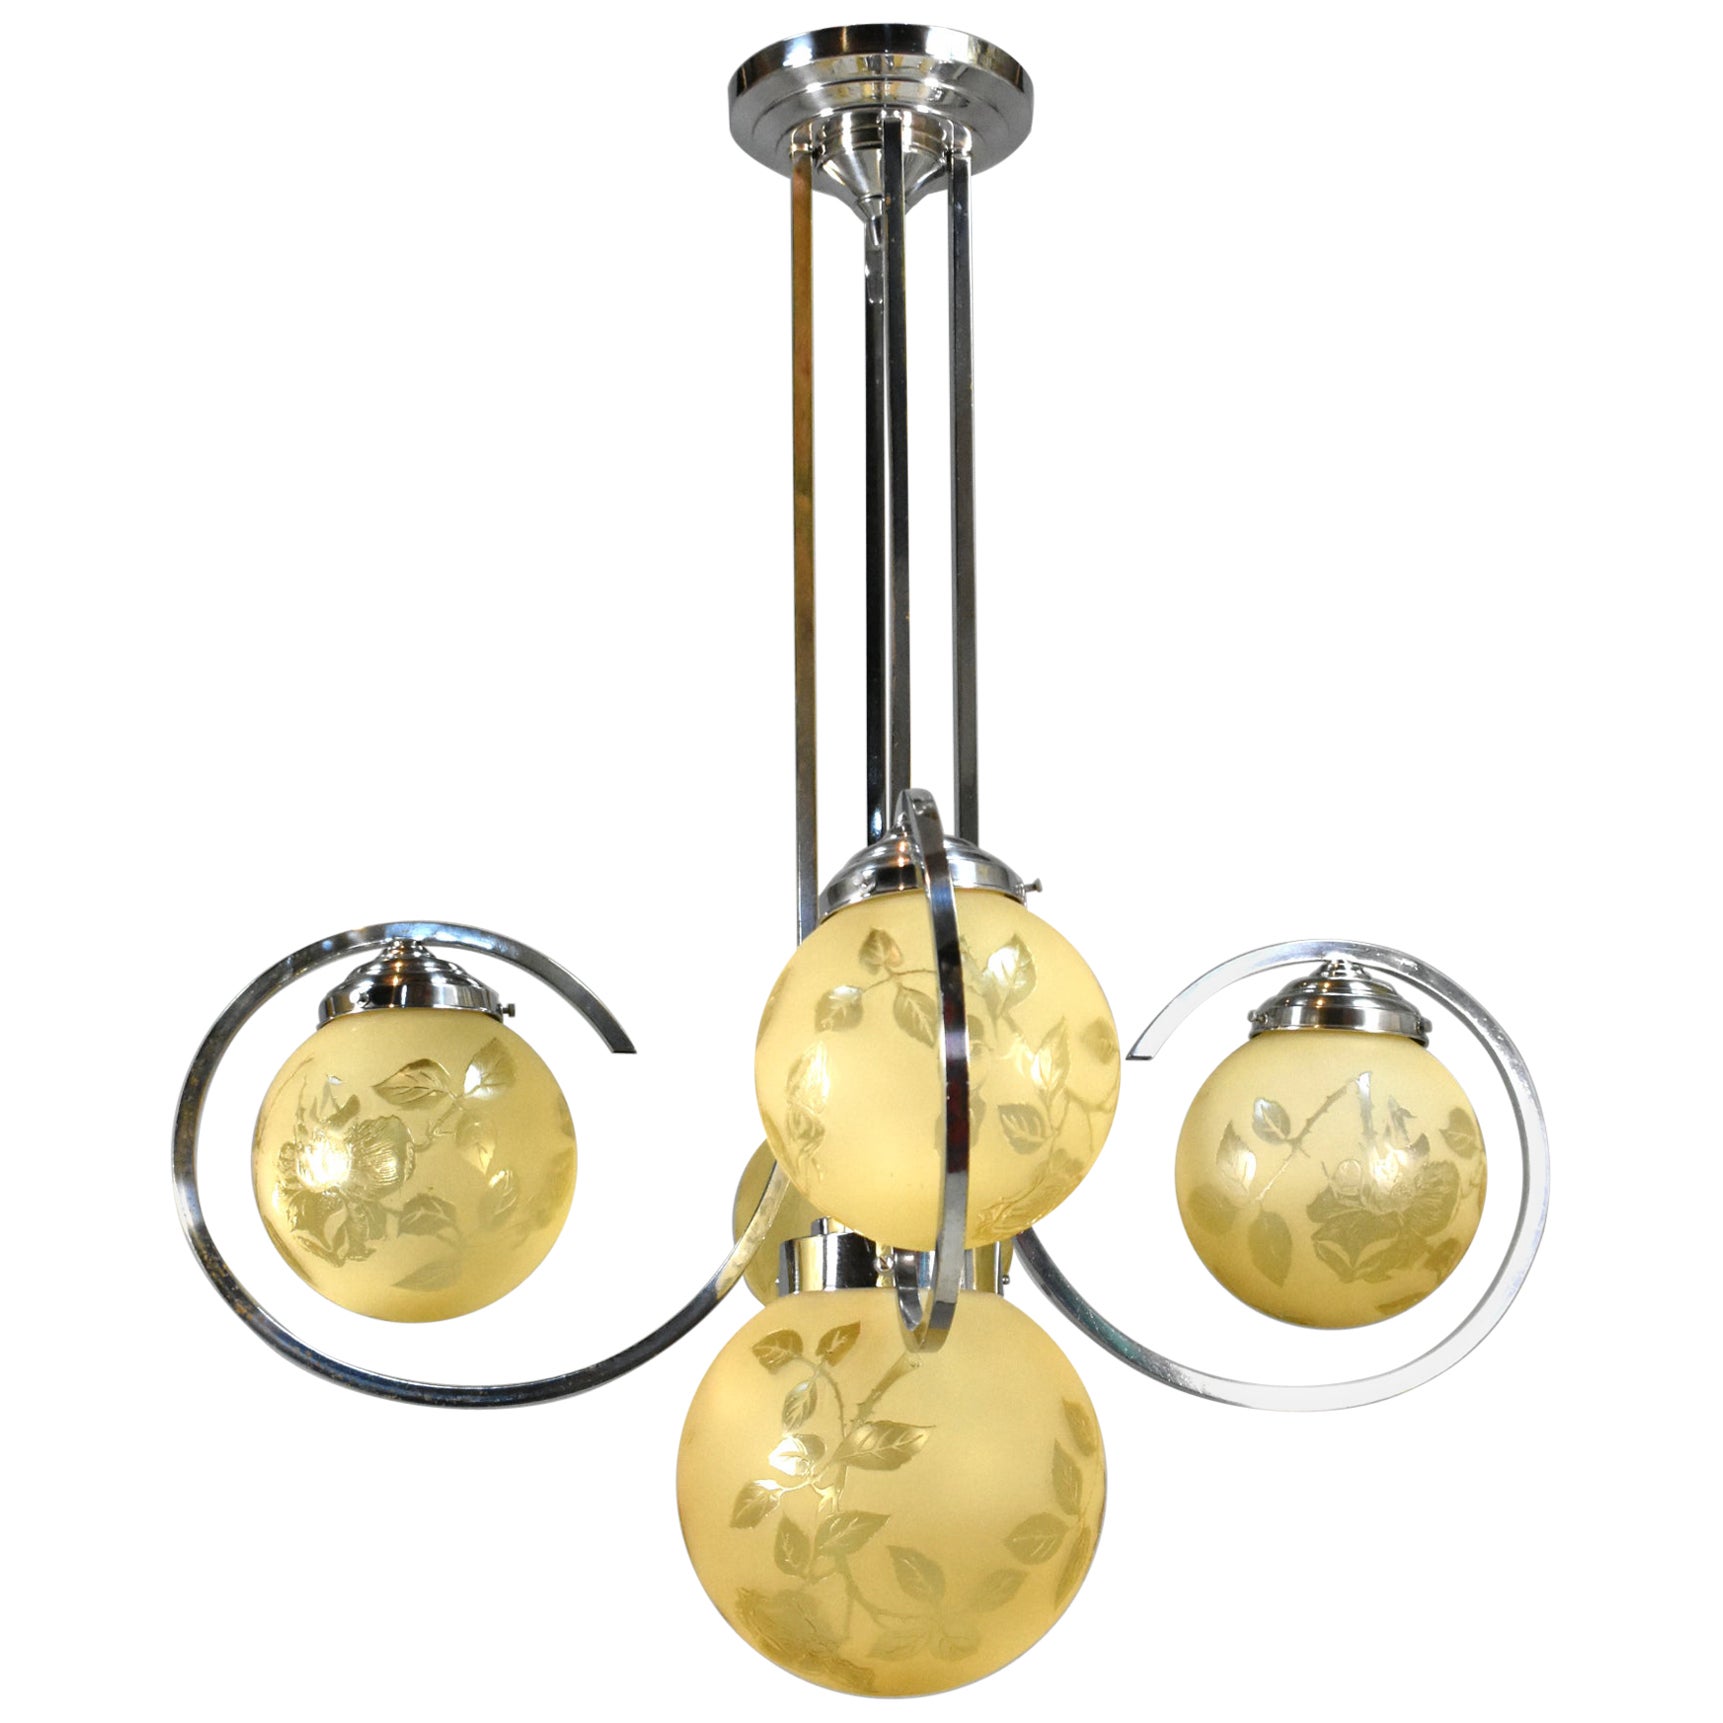 Exceptional French Art Deco Chandelier Light